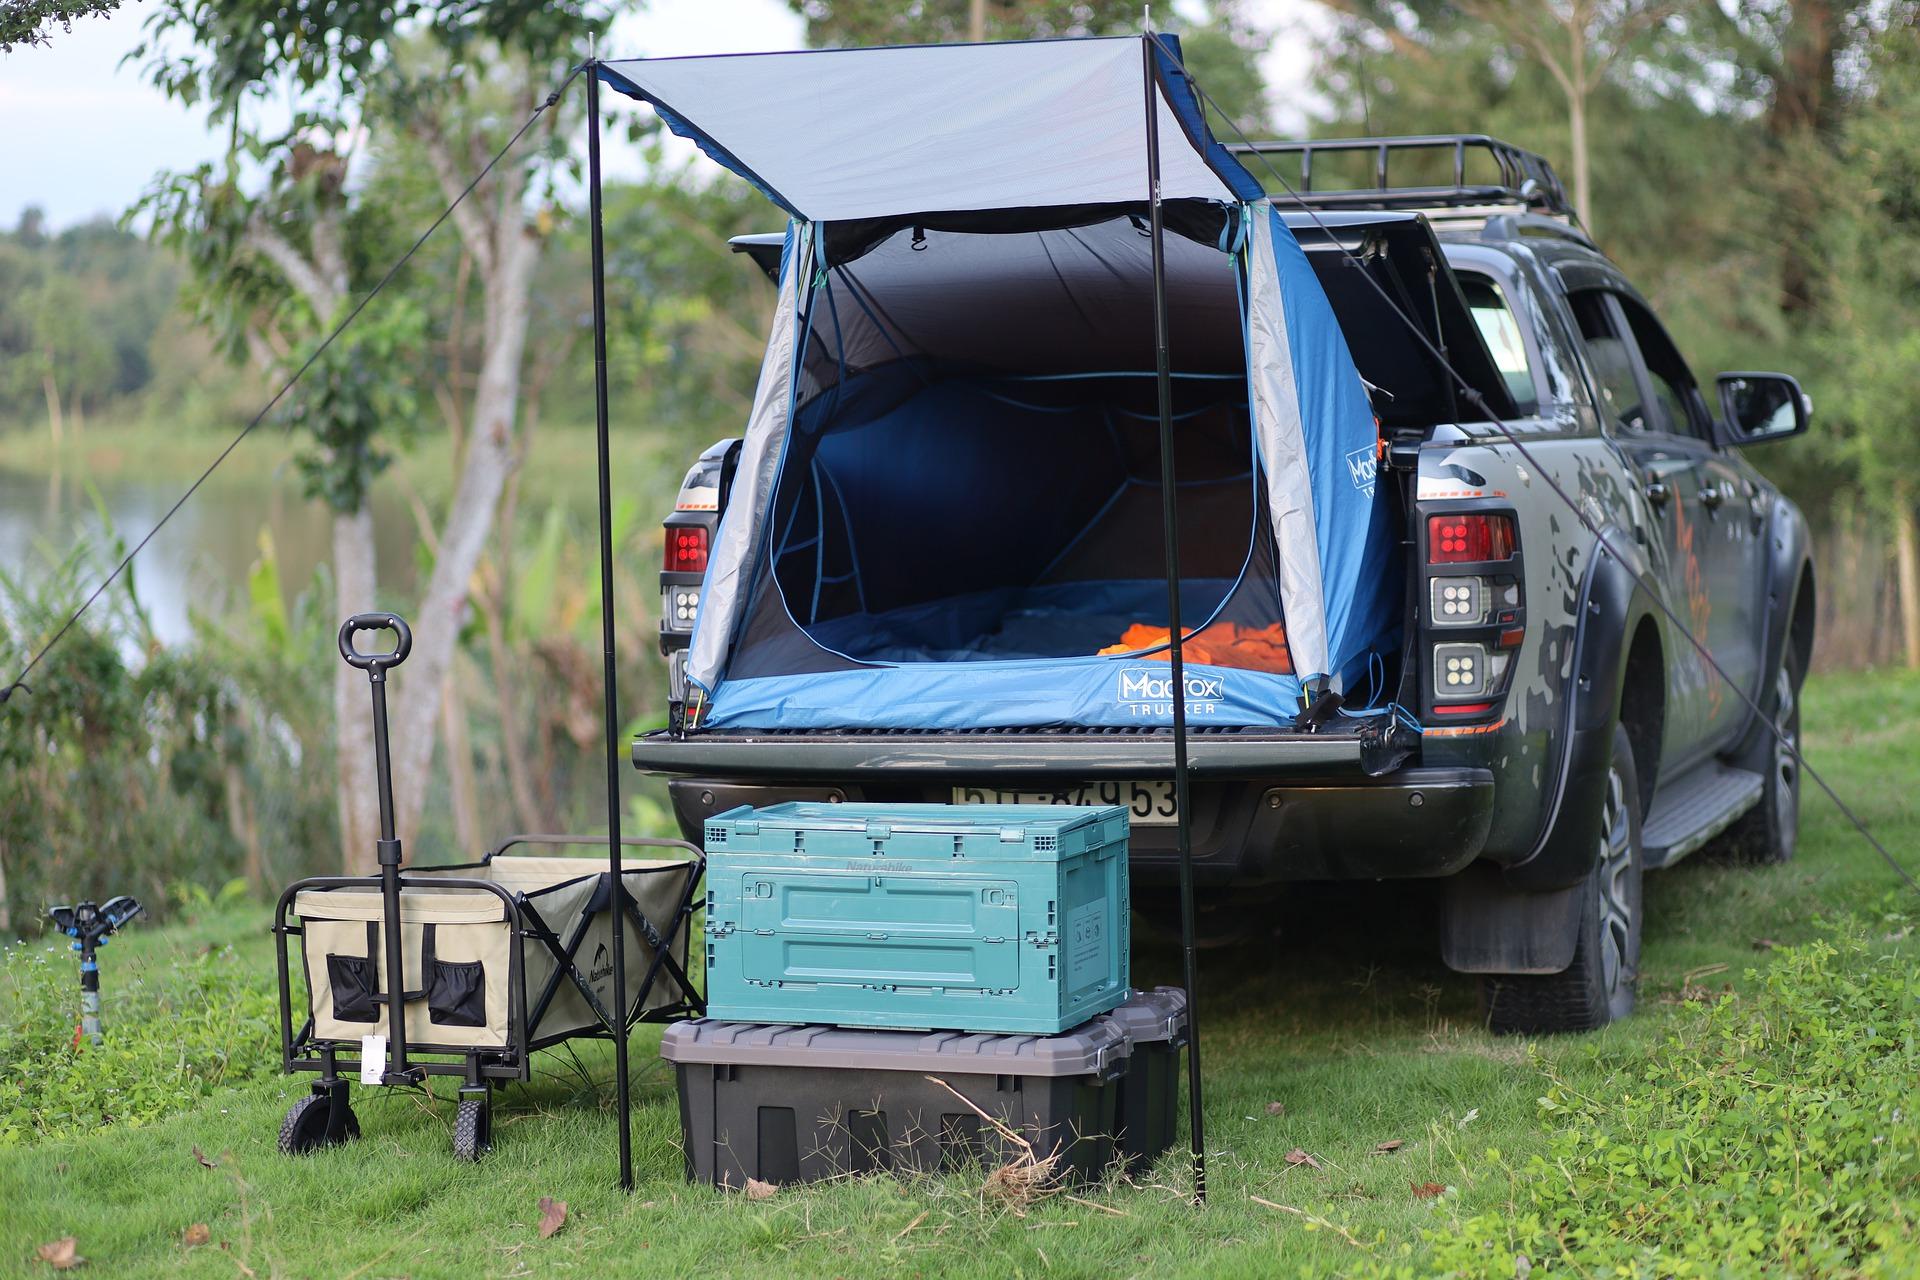 If you’ve always wanted to go camping with your truck well now you can!